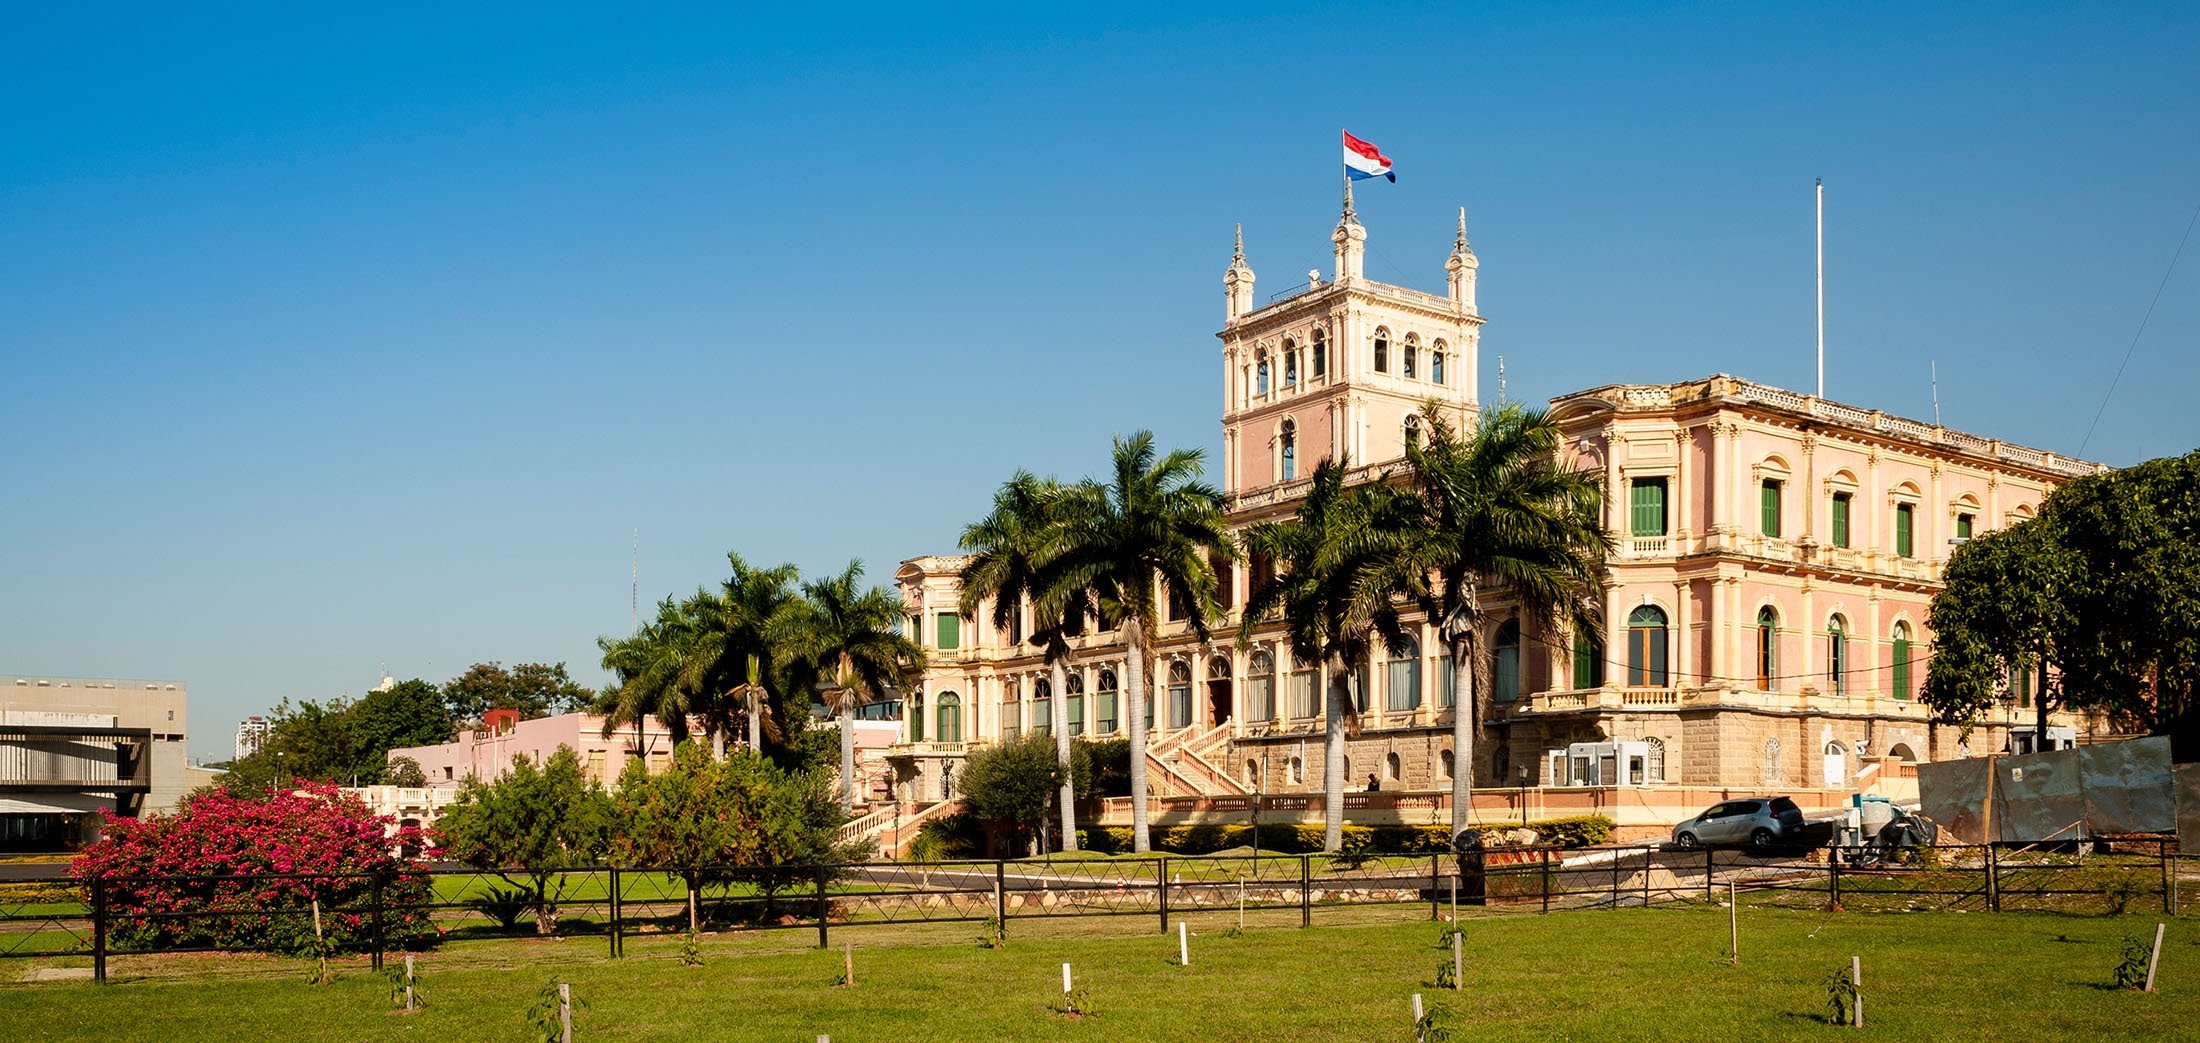 Palacio de Lopez, a palace that serves as the headquarters of the president of Paraguay, can be seen in the capital Asuncion, Paraguay, July, 15, 2018. (Shutterstock Photo)